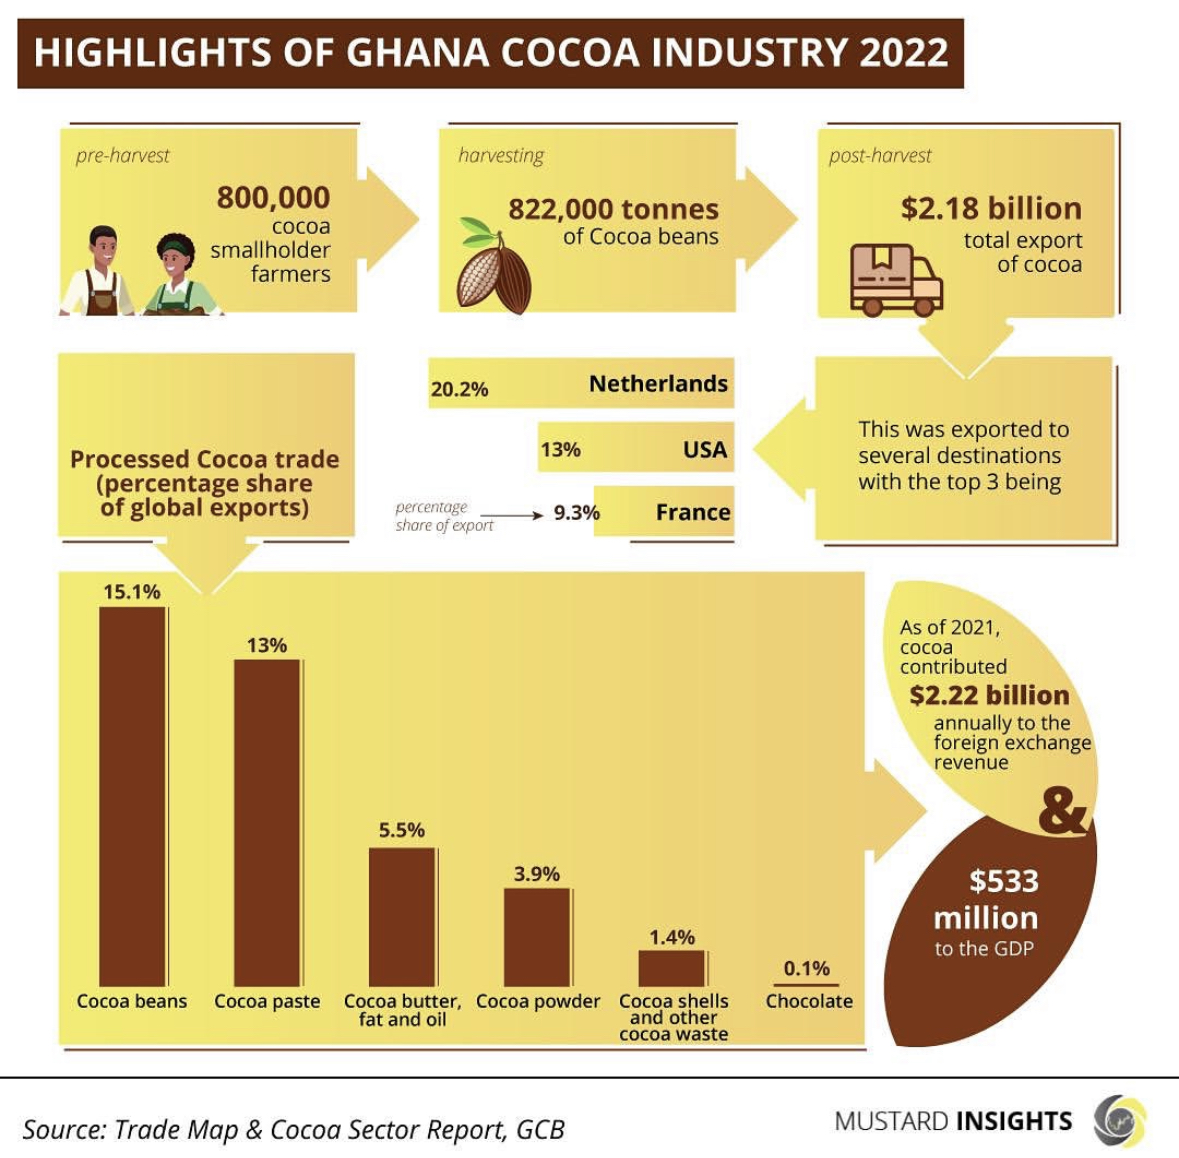 Africa's Cocoa Industry 2022